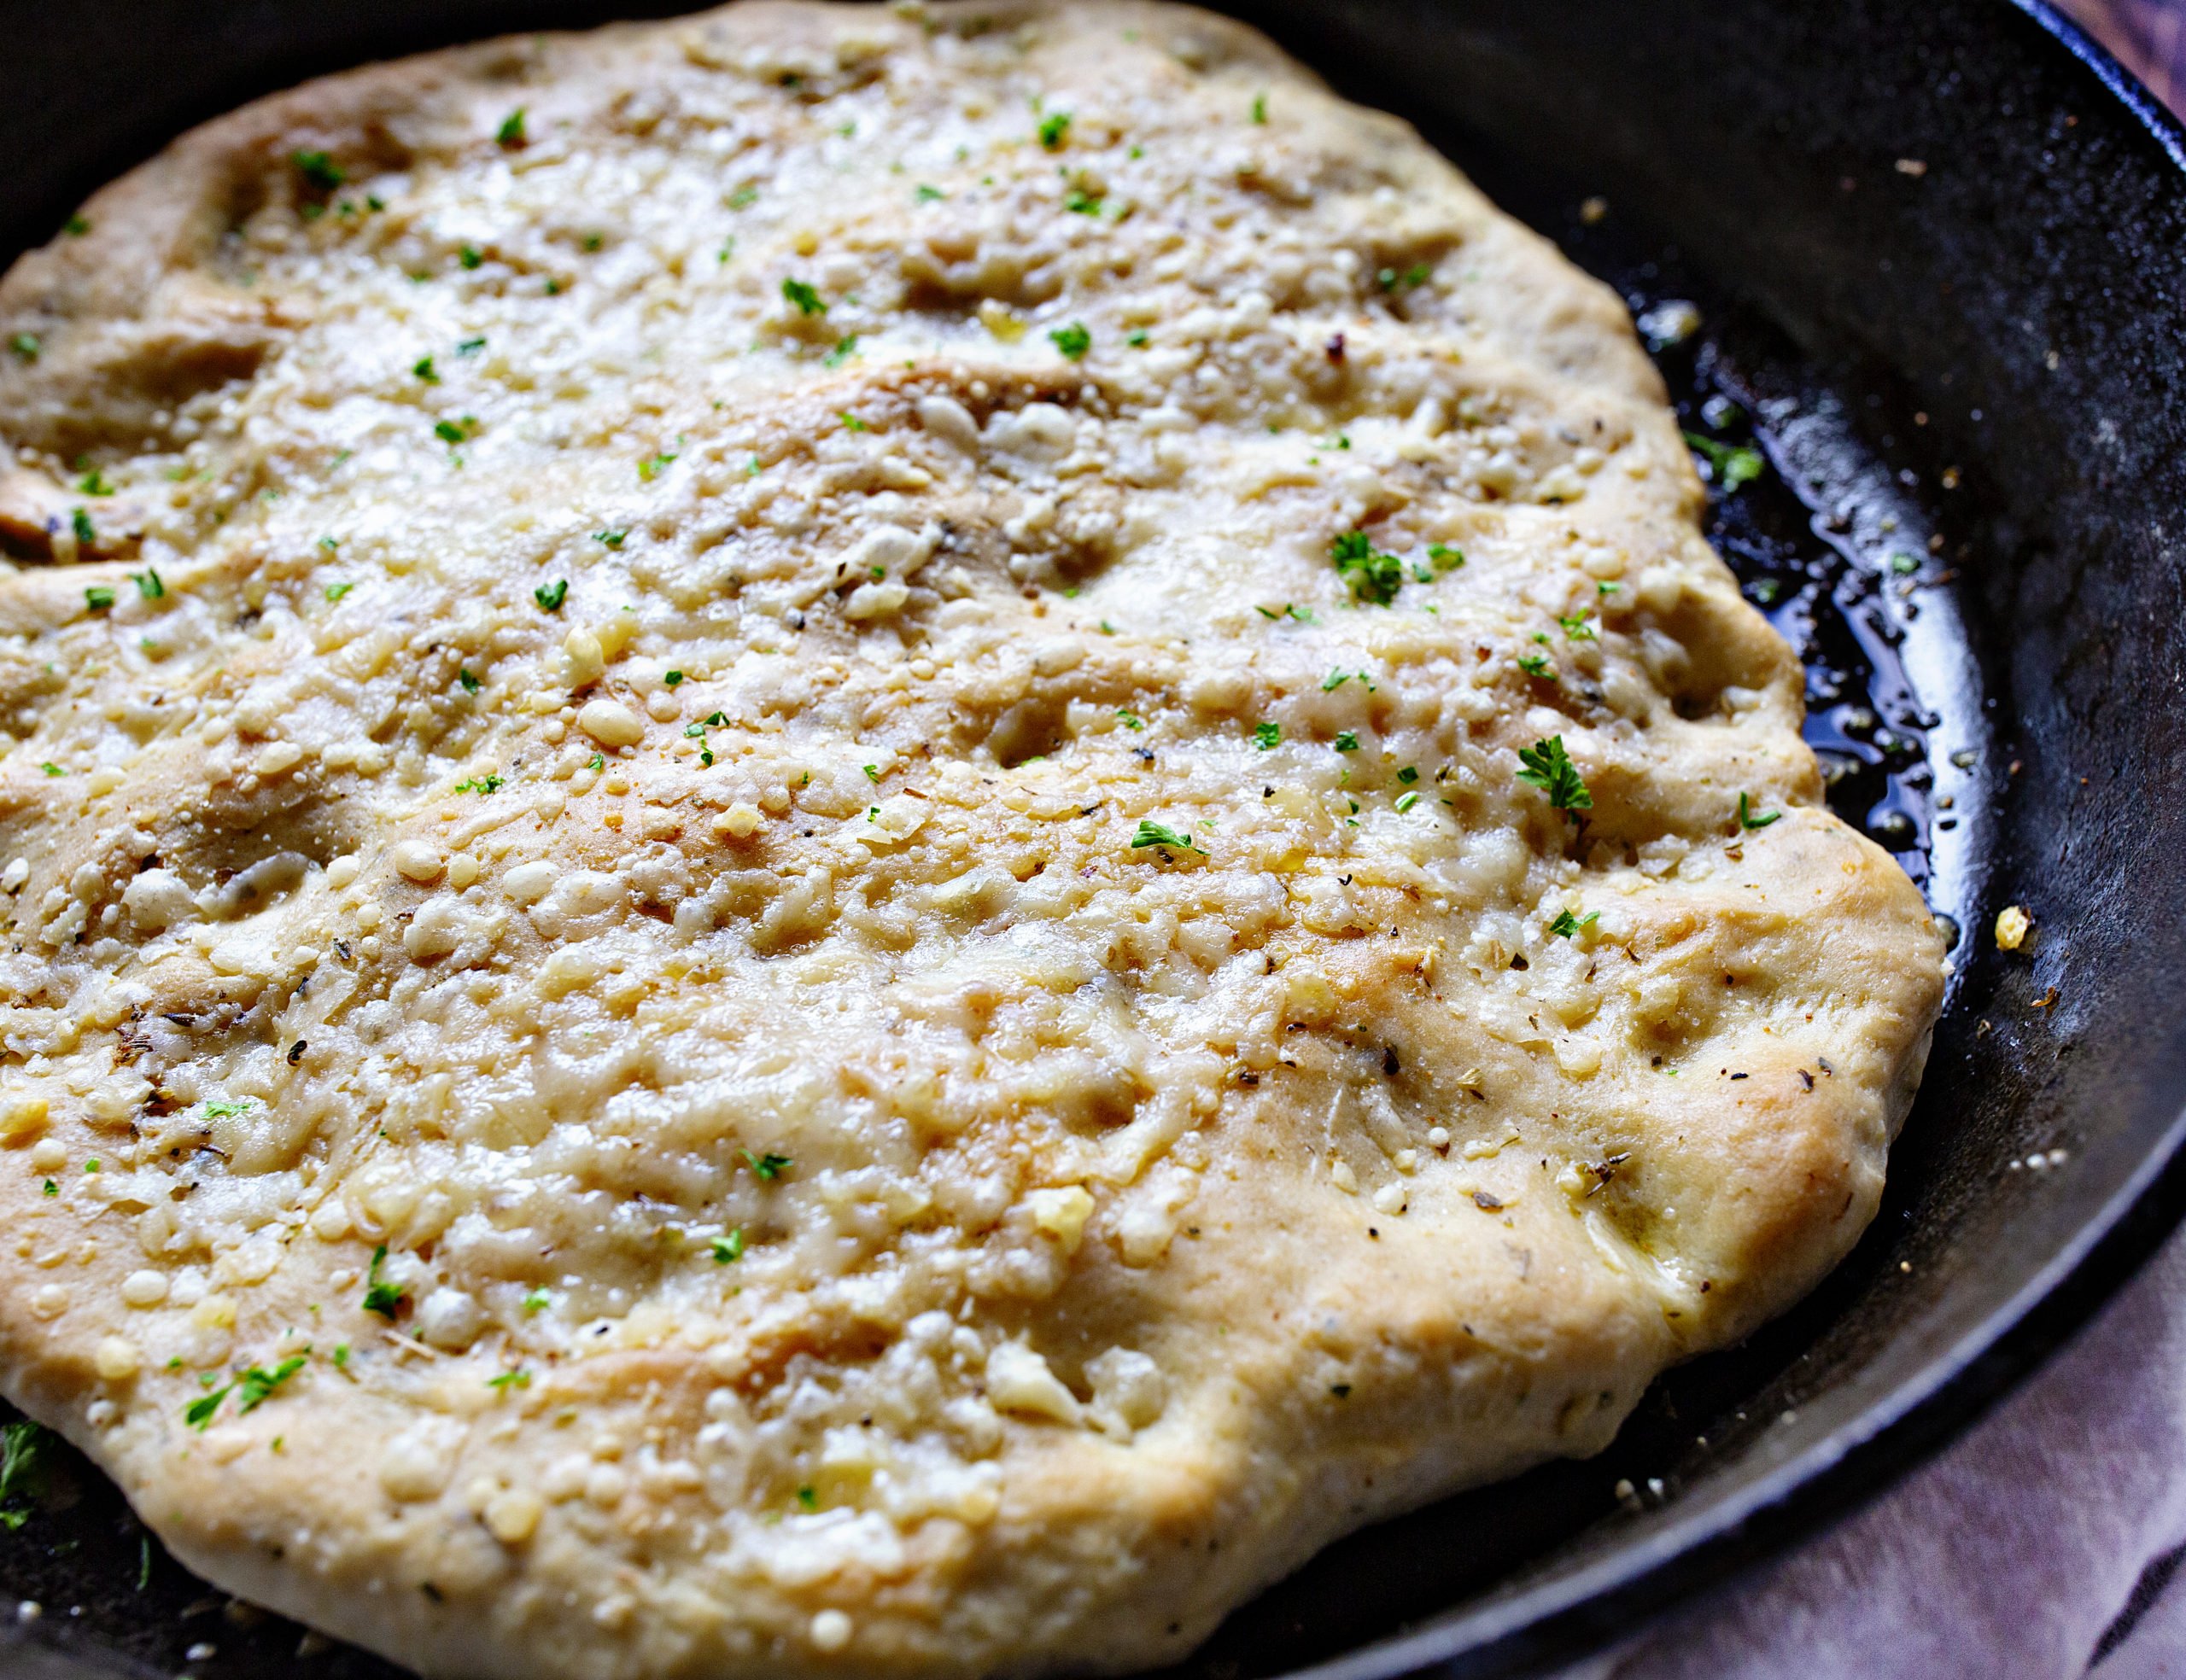 Parmesan Baked Focaccia Bread in a Skillet